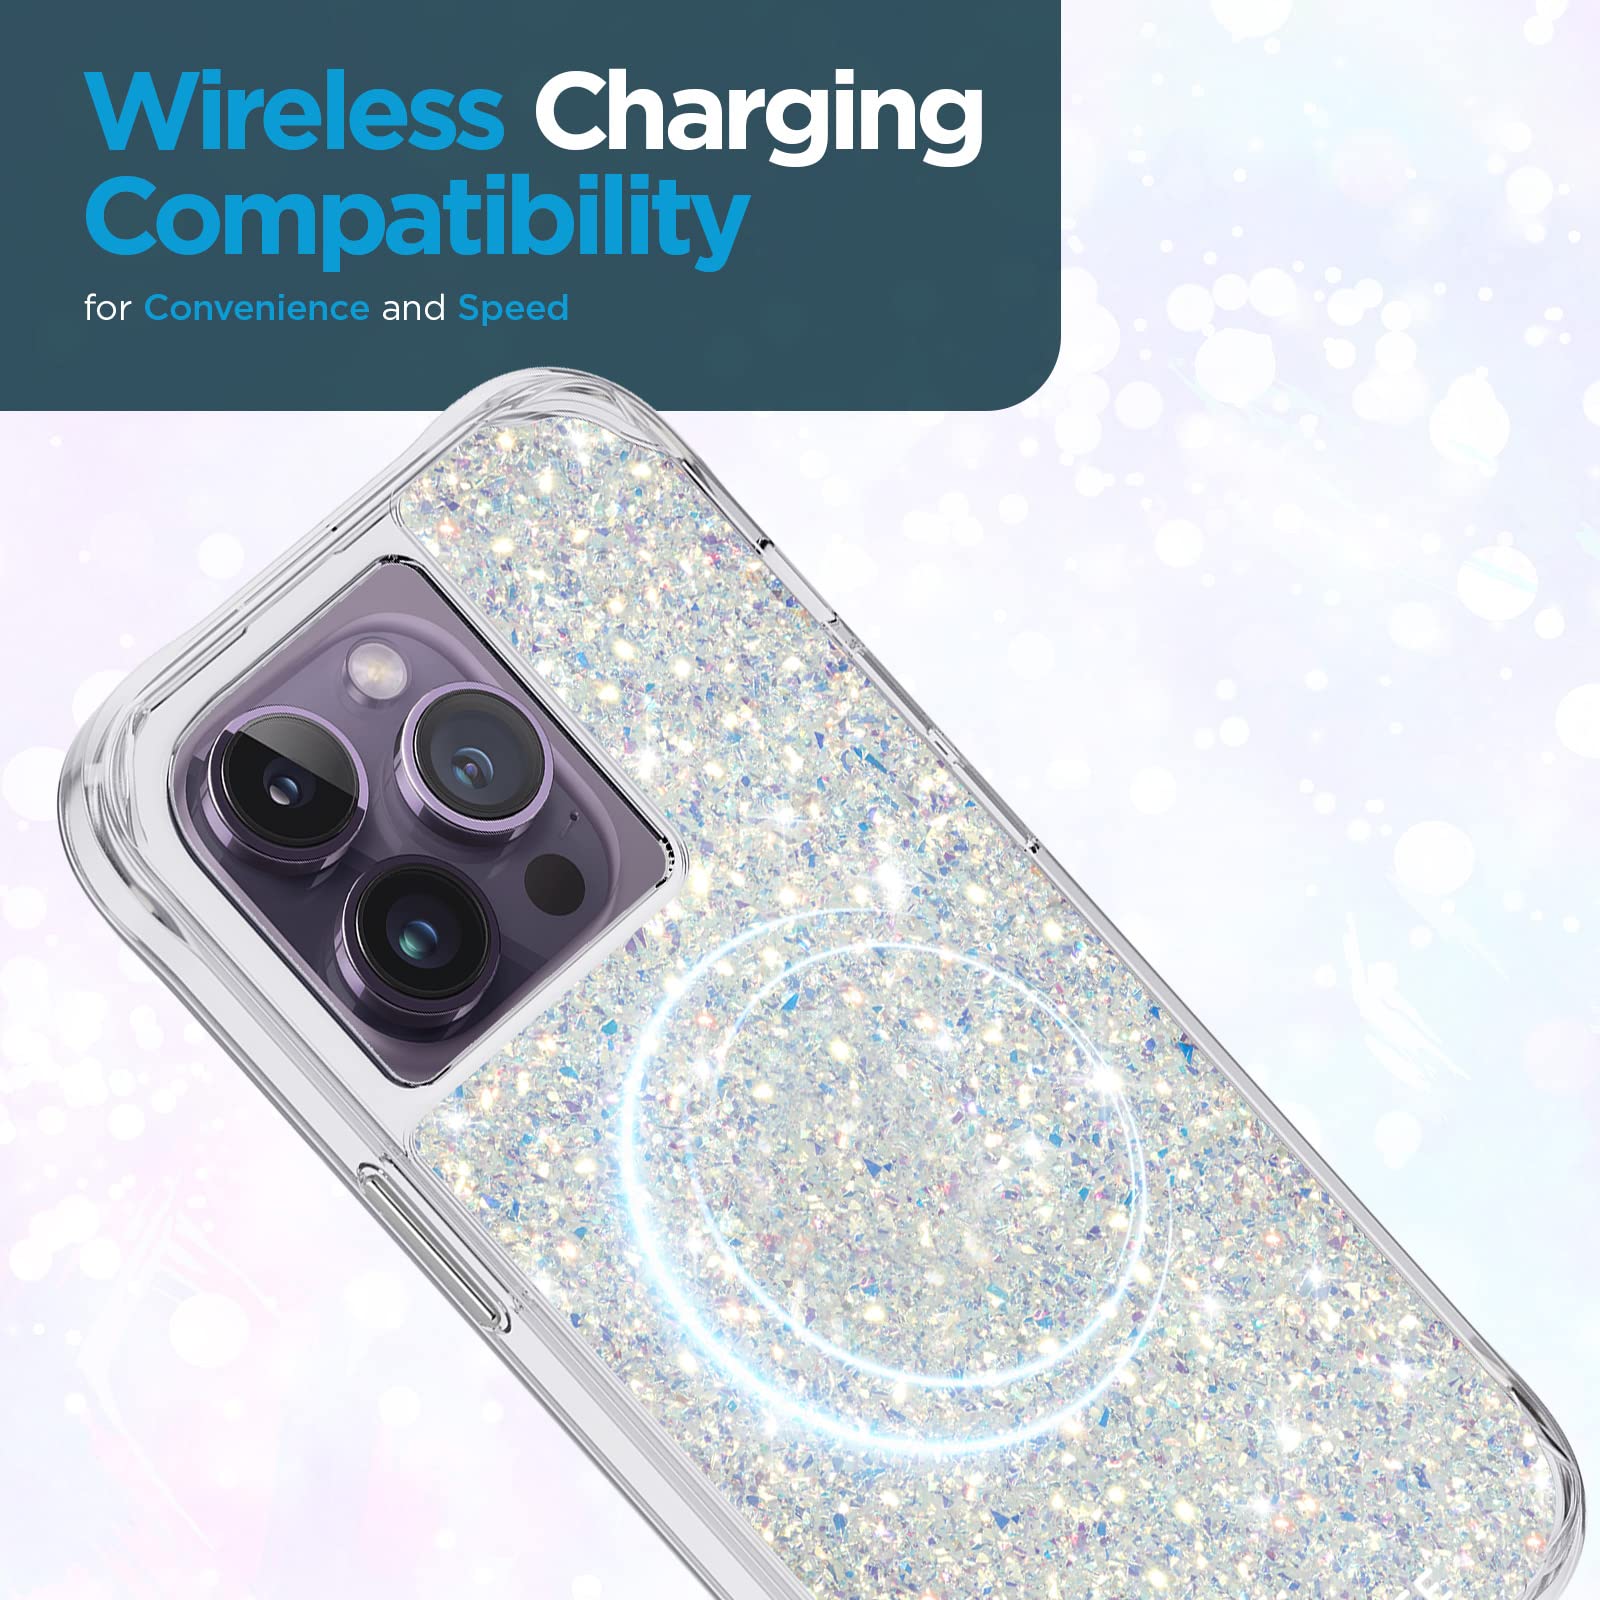 Case-Mate - Twinkle - Case for iPhone 12 and iPhone 12 Pro (5G) - 10 ft Drop Protection - 6.1 inch - Stardust